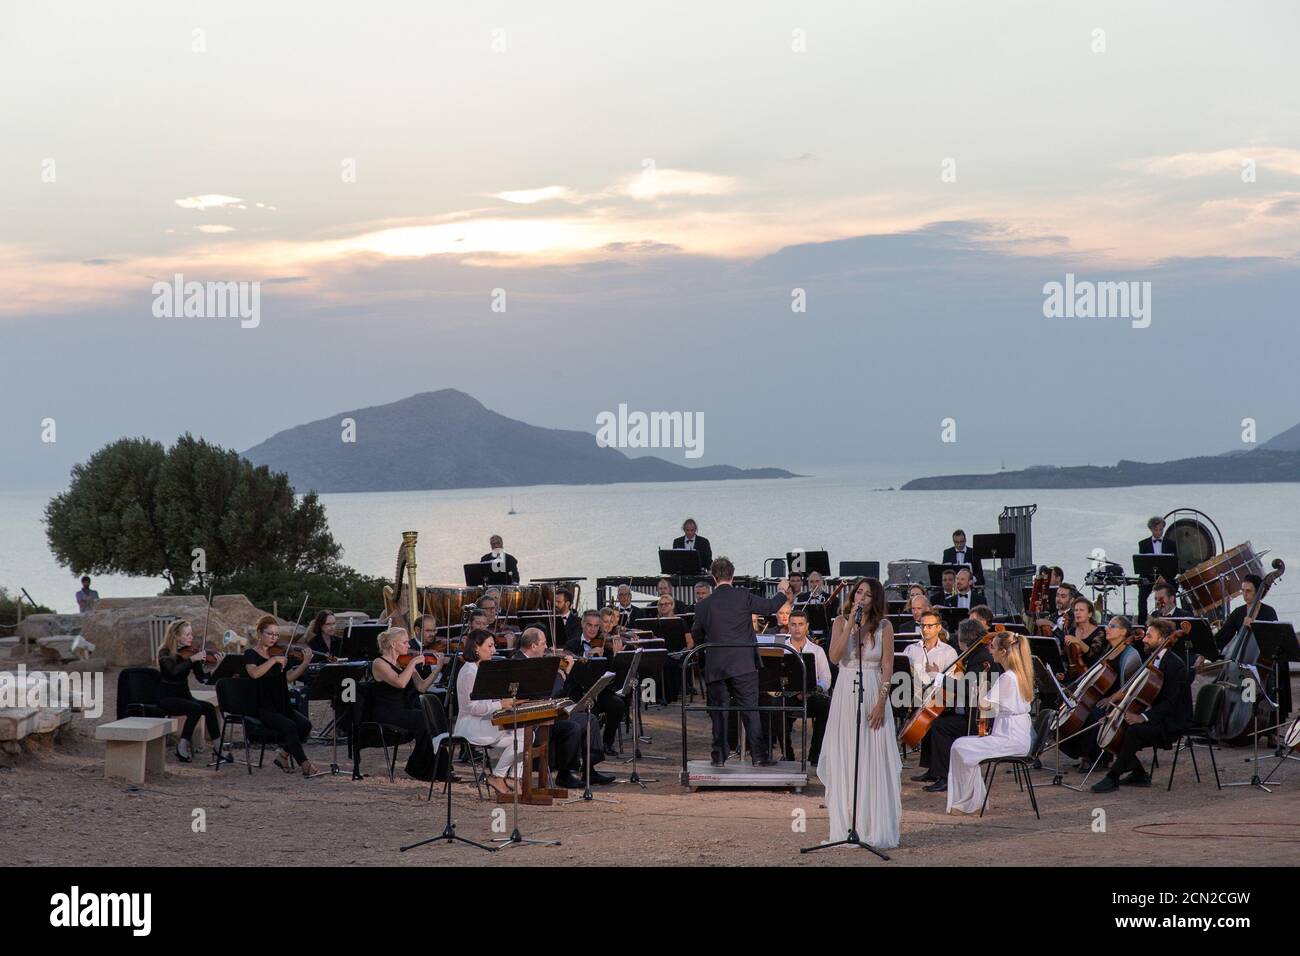 (200917) -- ATHENS, Sept. 17, 2020 (Xinhua) -- Musicians perform a musical in front of the ruins of the Temple of Poseidon at cape Sounion, some 70 km southeast of Athens, Greece, on Sept. 17, 2020. On the occasion of the 70th anniversary of the establishment of the Greek National Tourism Organization (GNTO) and the 71st anniversary of the founding of the People's Republic of China and the Mid-Autumn festival, a musical entitled 'As long as there shall be Achaeans -- Variations on a Sunbeam' was staged on Thursday in front of the ruins of the emblematic 2,500-year-old Temple of Poseidon, the g Stock Photo